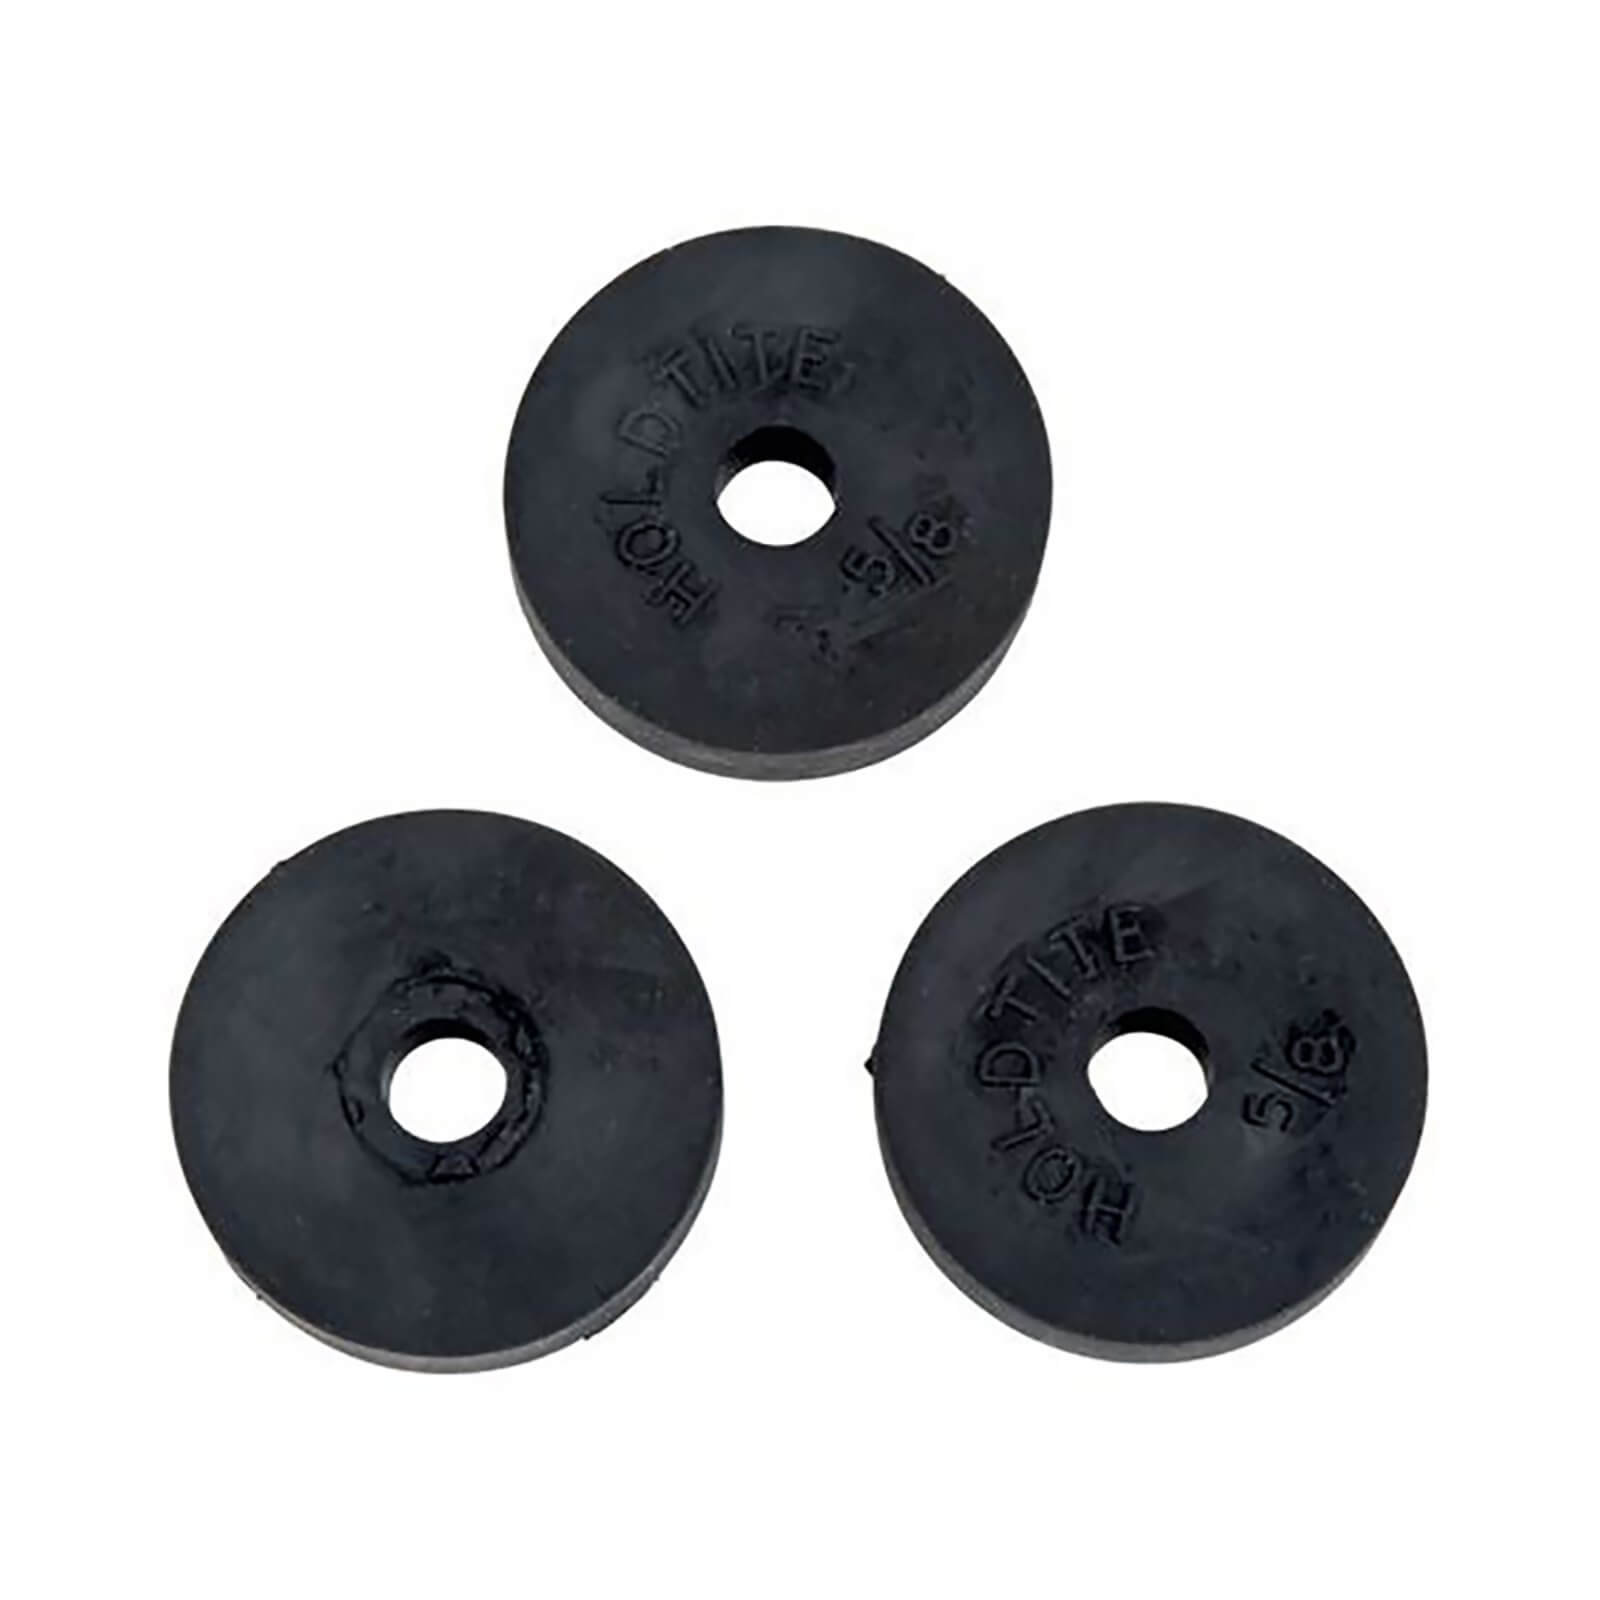 Photo of Flat Tap Washers - 16mm - 3 Pack